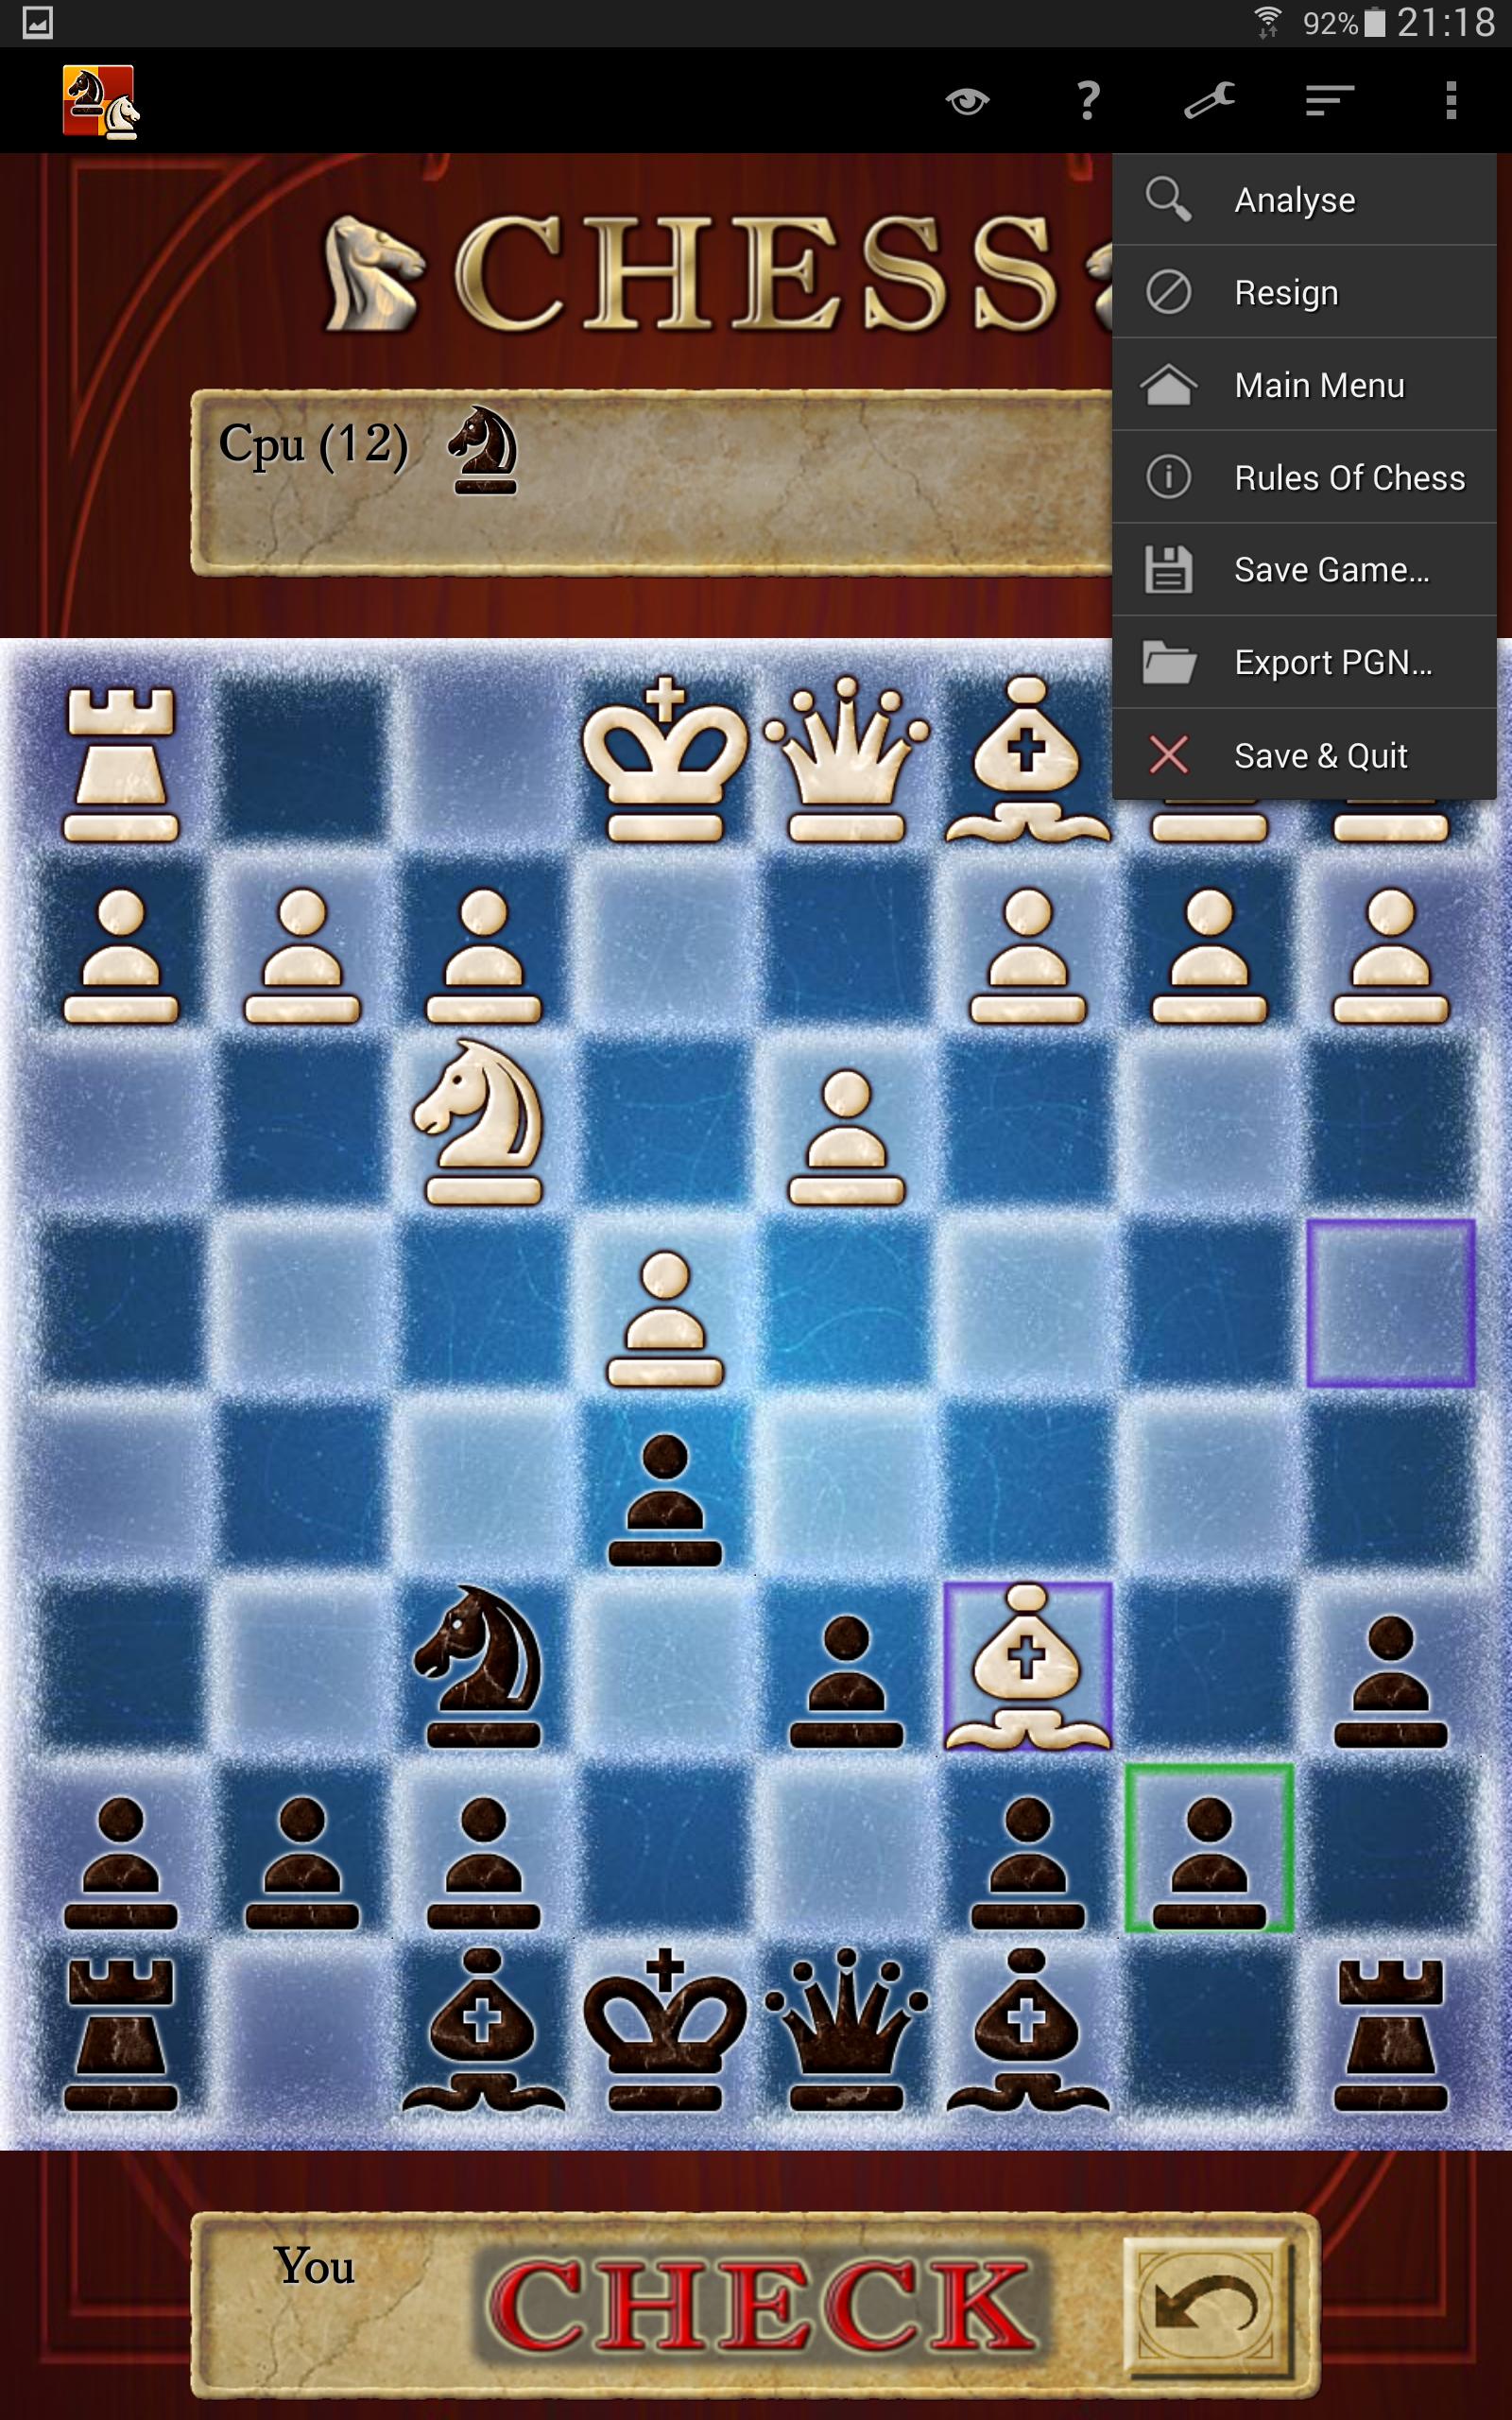 Scacchi (Chess Free) for Android - APK Download